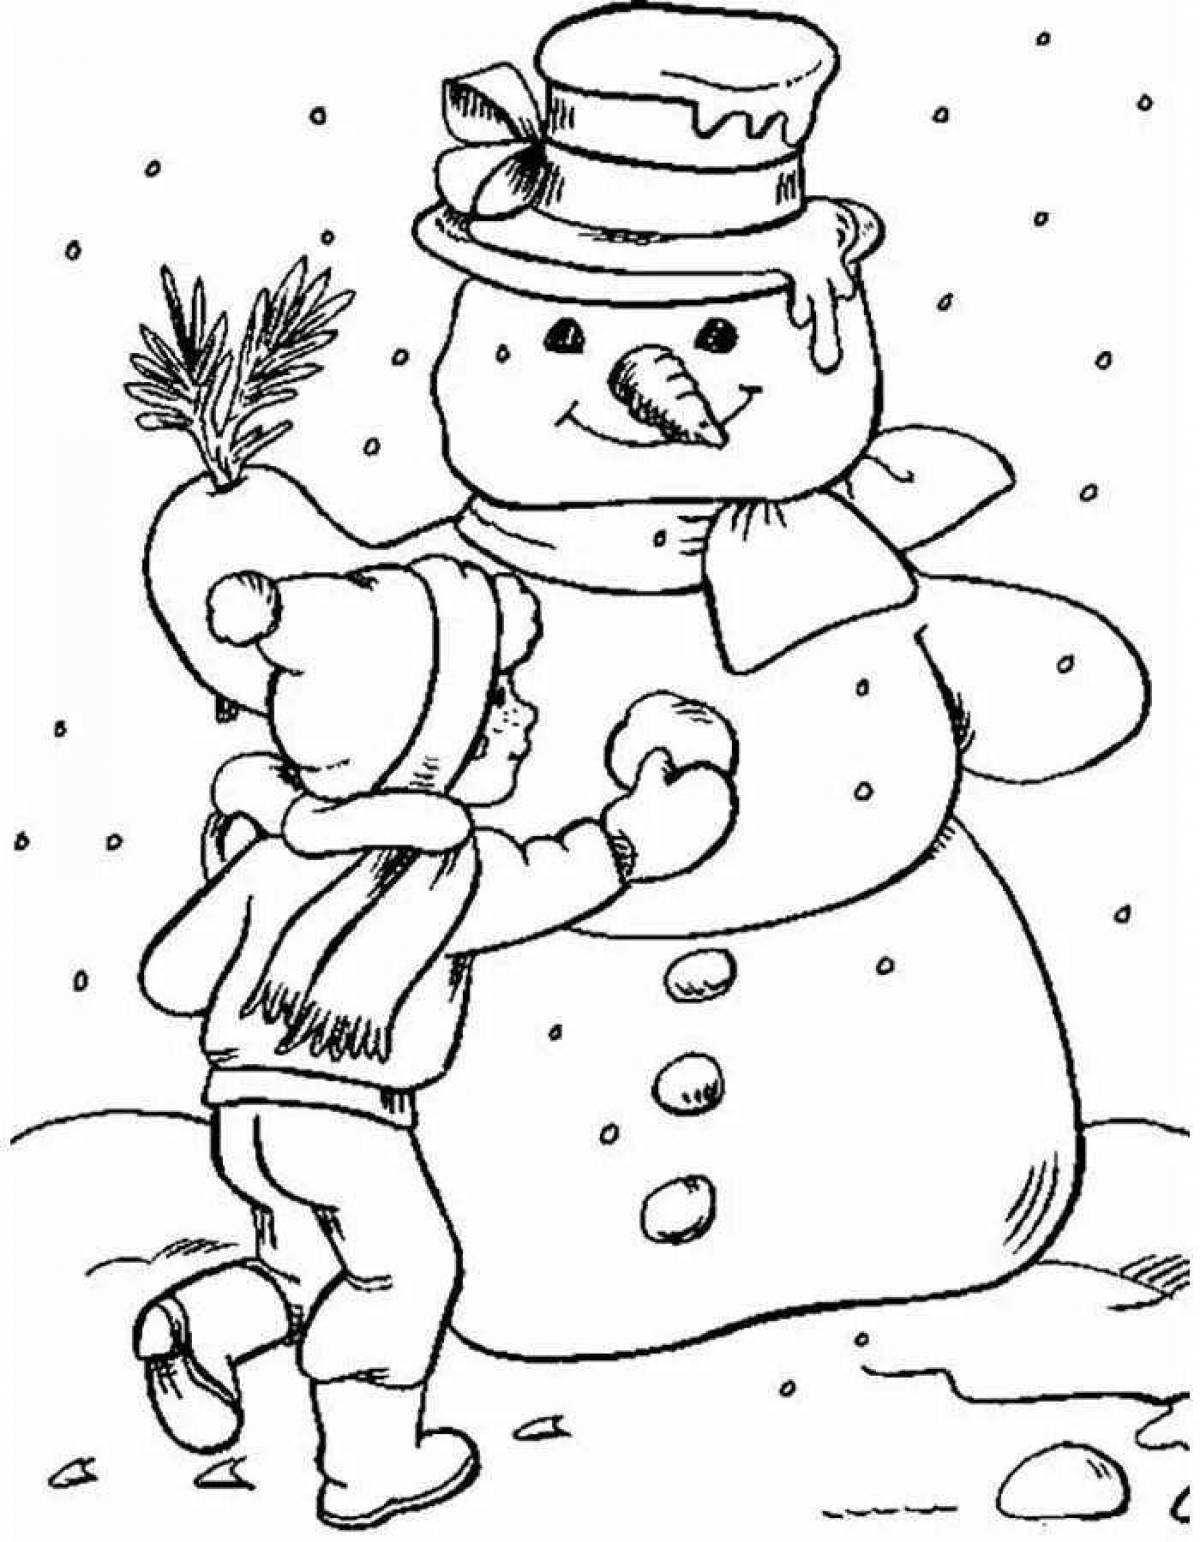 Fancy snowman birthday coloring page